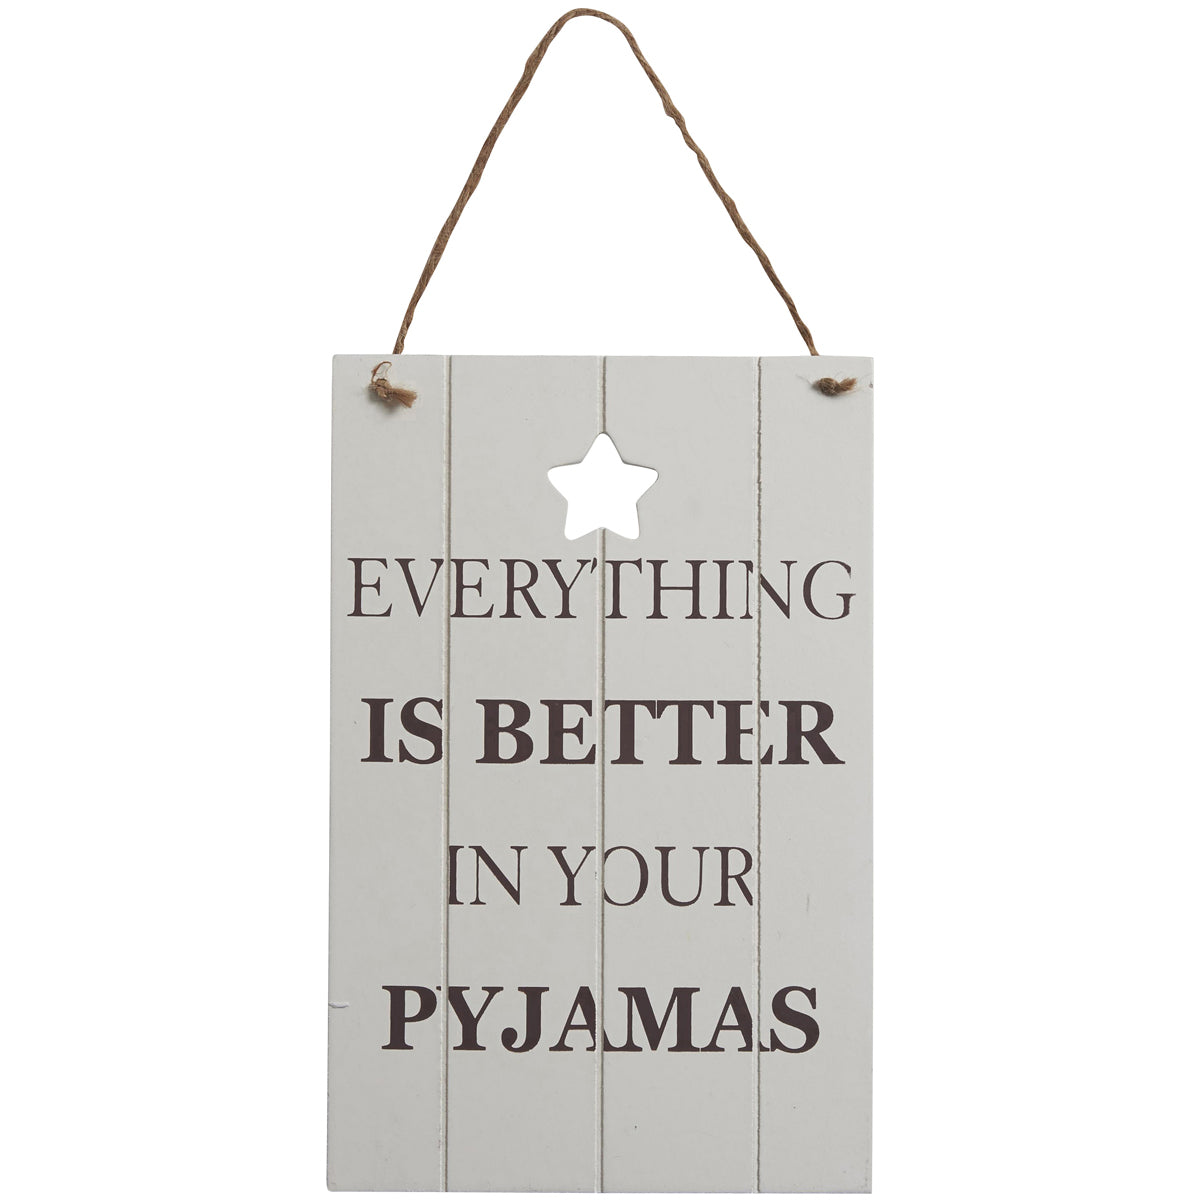 Wooden sign with a vintage chic look and featuring the slogan: Everything is Better in your Pyjamas.